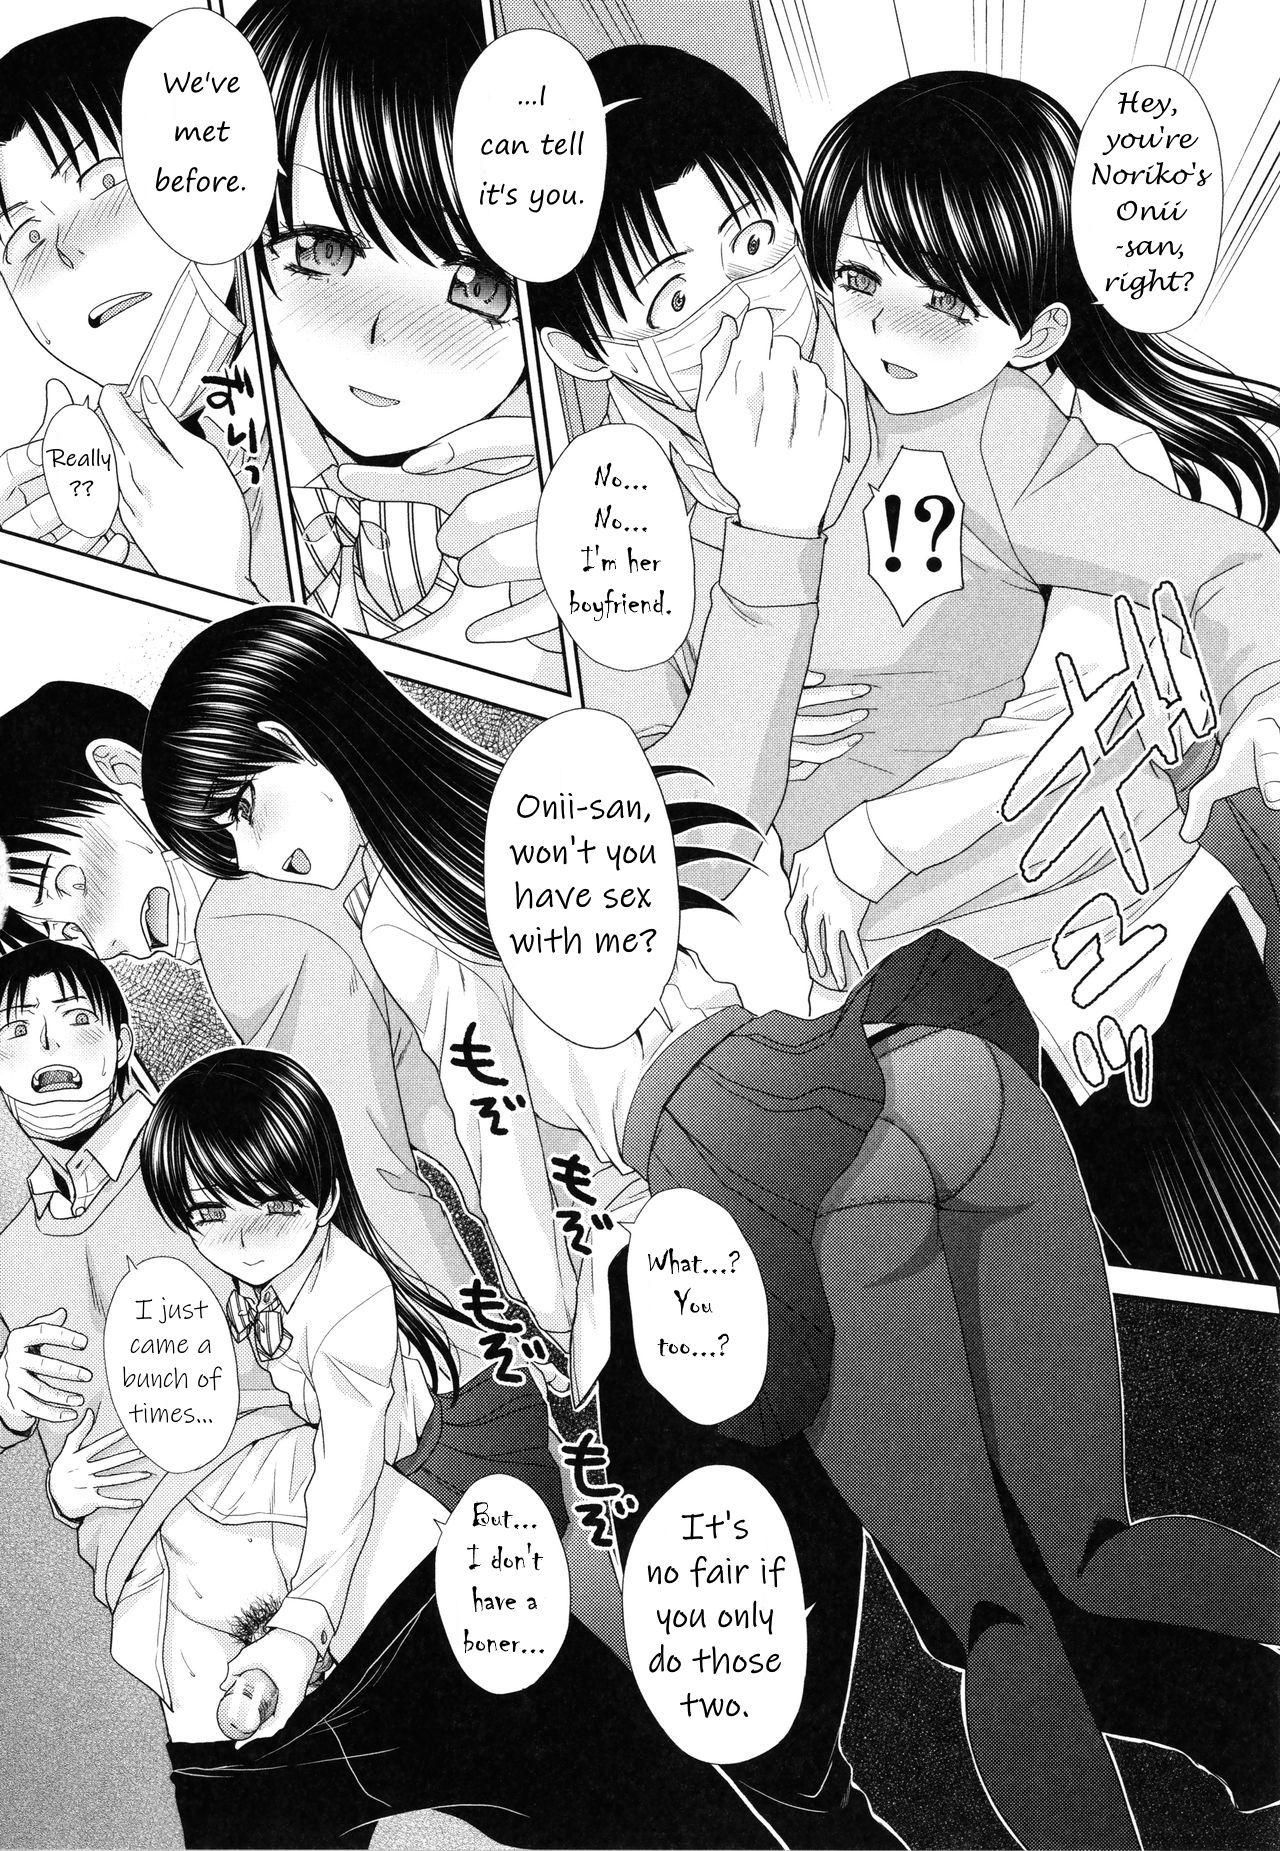 Imouto to Yatte Shimattashi, Imouto no Tomodachi to mo Yatte Shimatta | I had sex with my sister and then I had sex with her friends 66